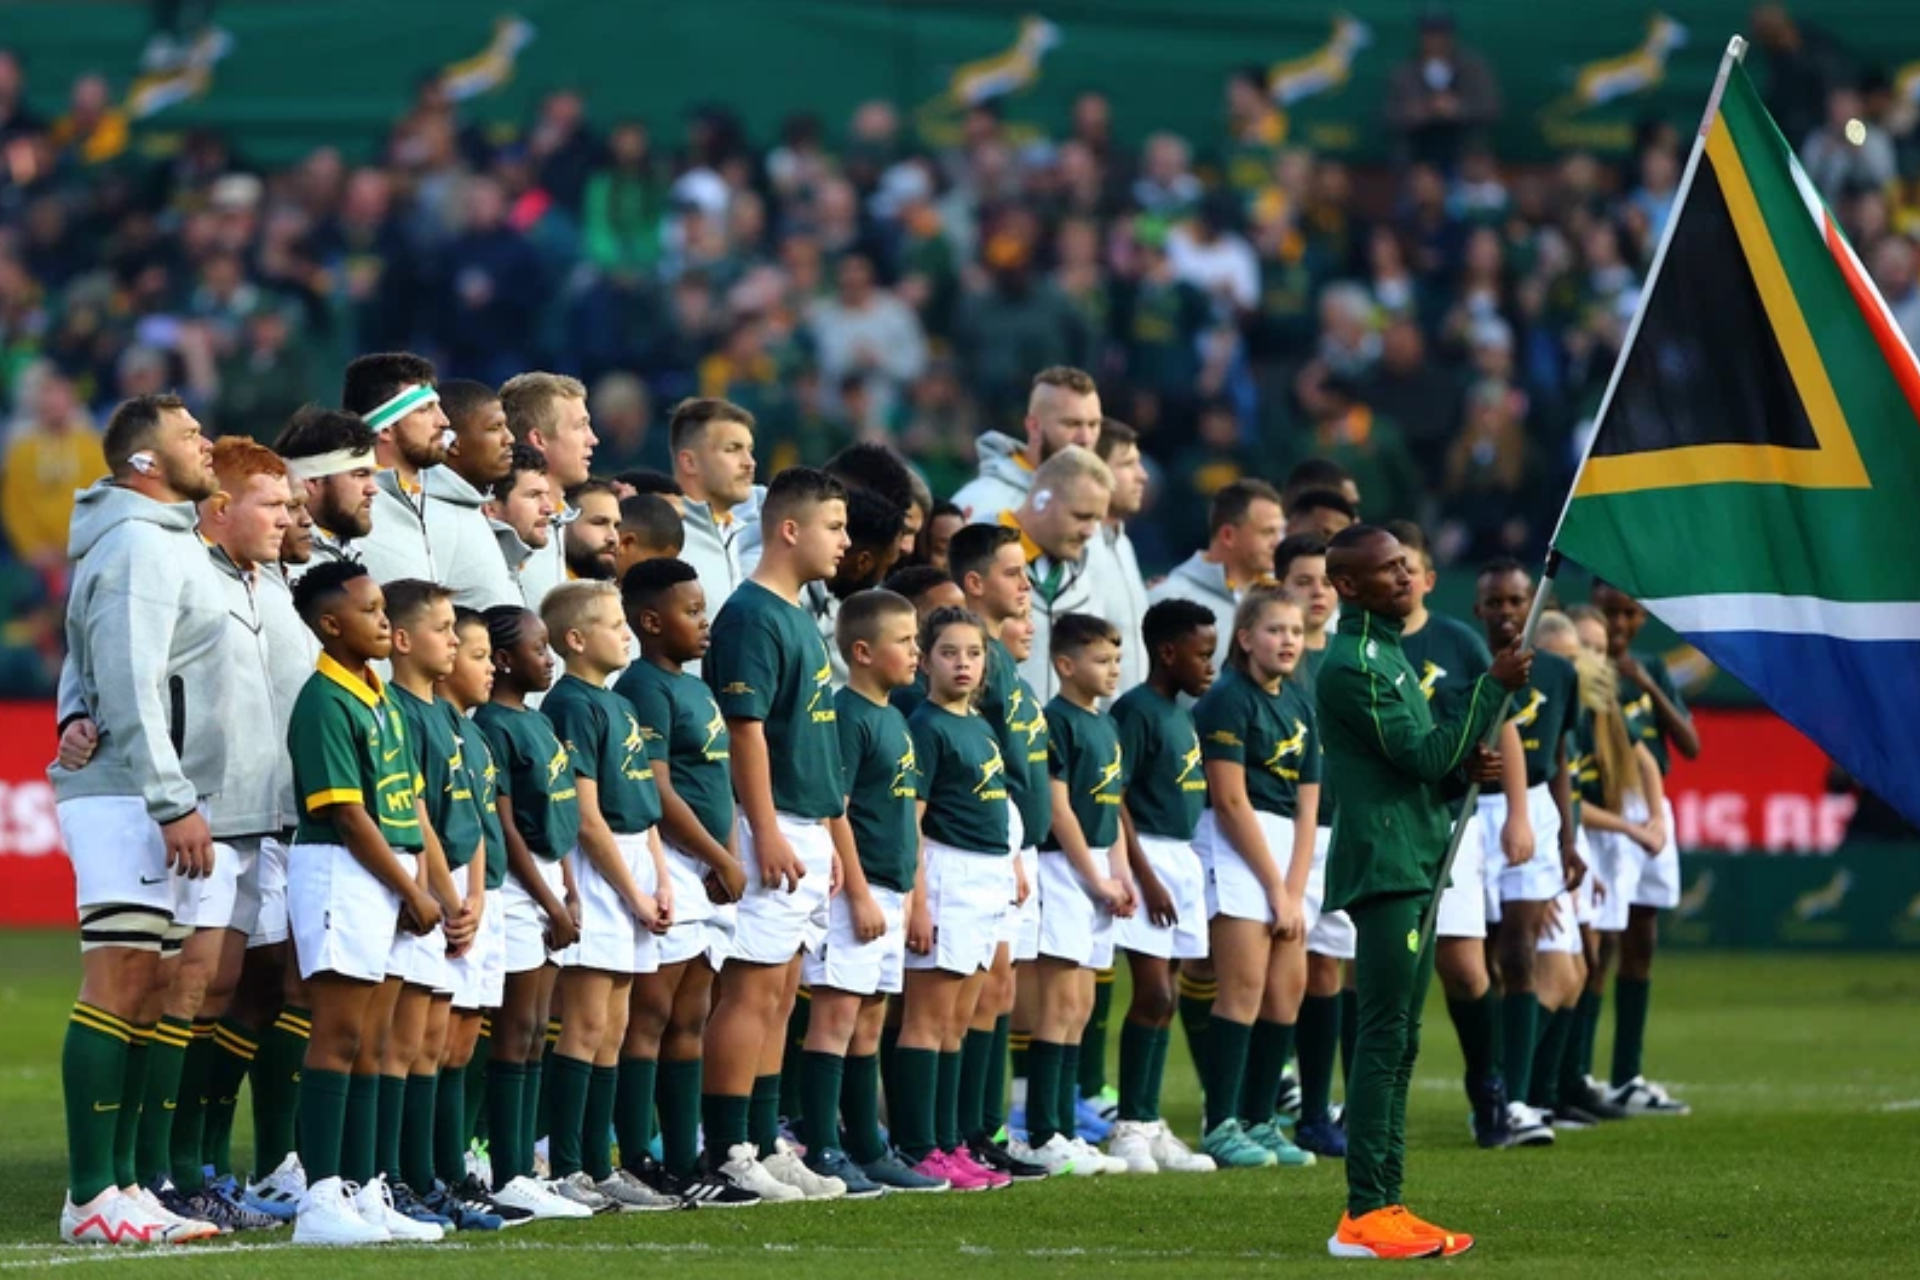 The Springboks brand - Rugby World Cup group